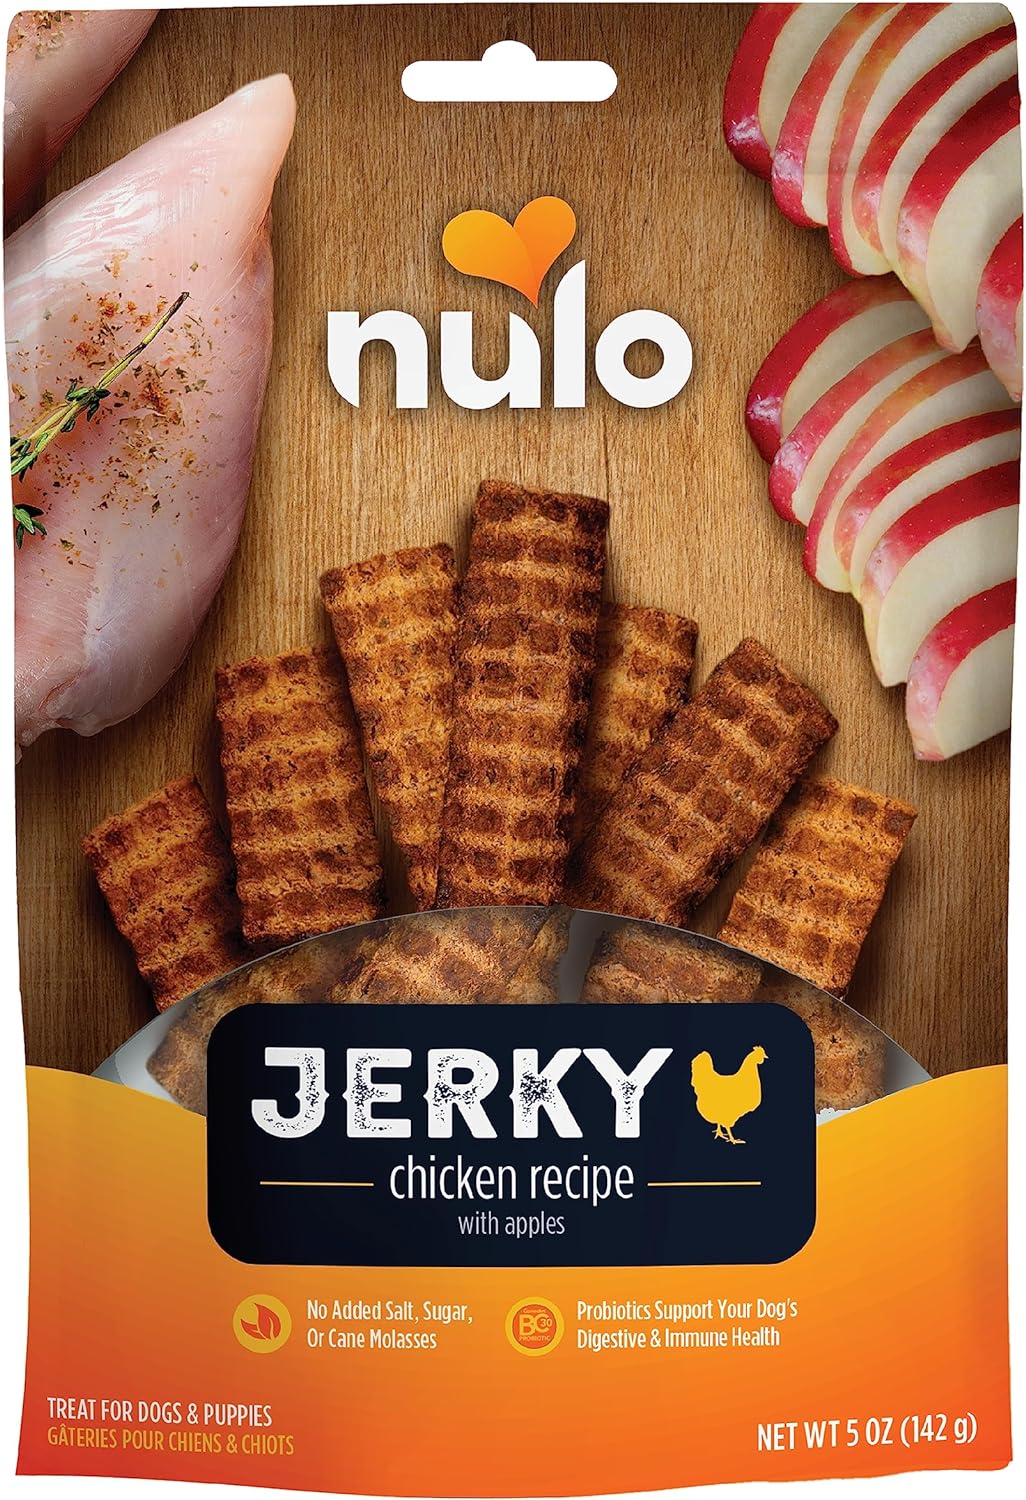 Nulo Dog Freestyle Grain-Free Chicken Recipe With Apples Jerky Dog Treats, 5-oz